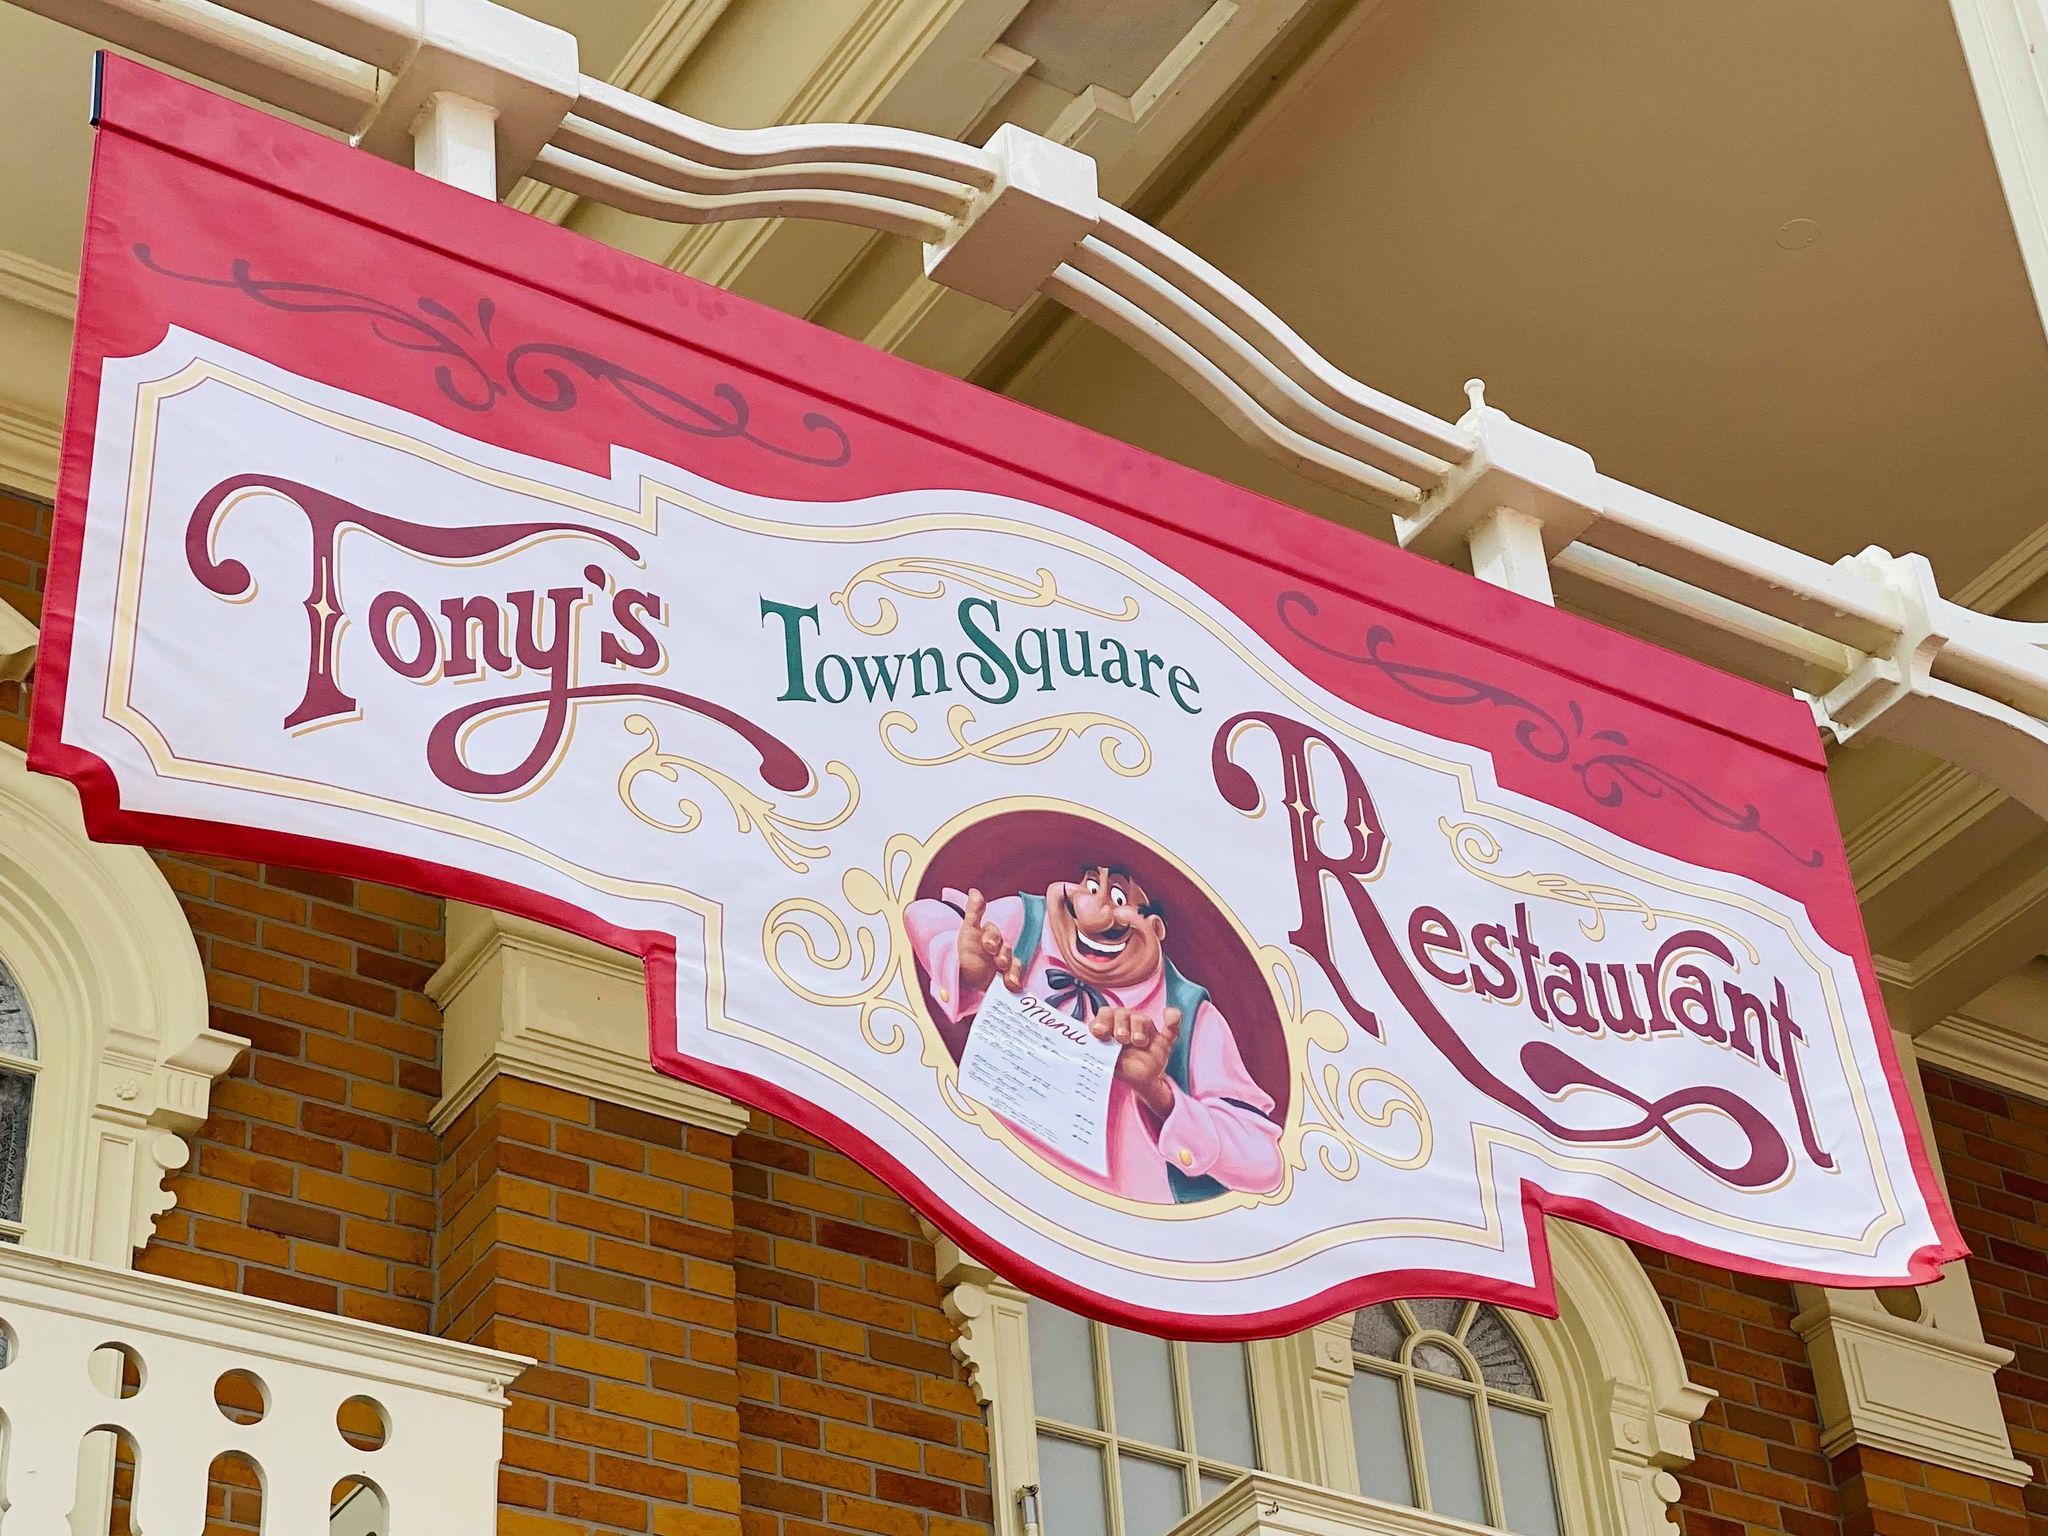 Tony's Town Square Restaurant Gets a New Sign